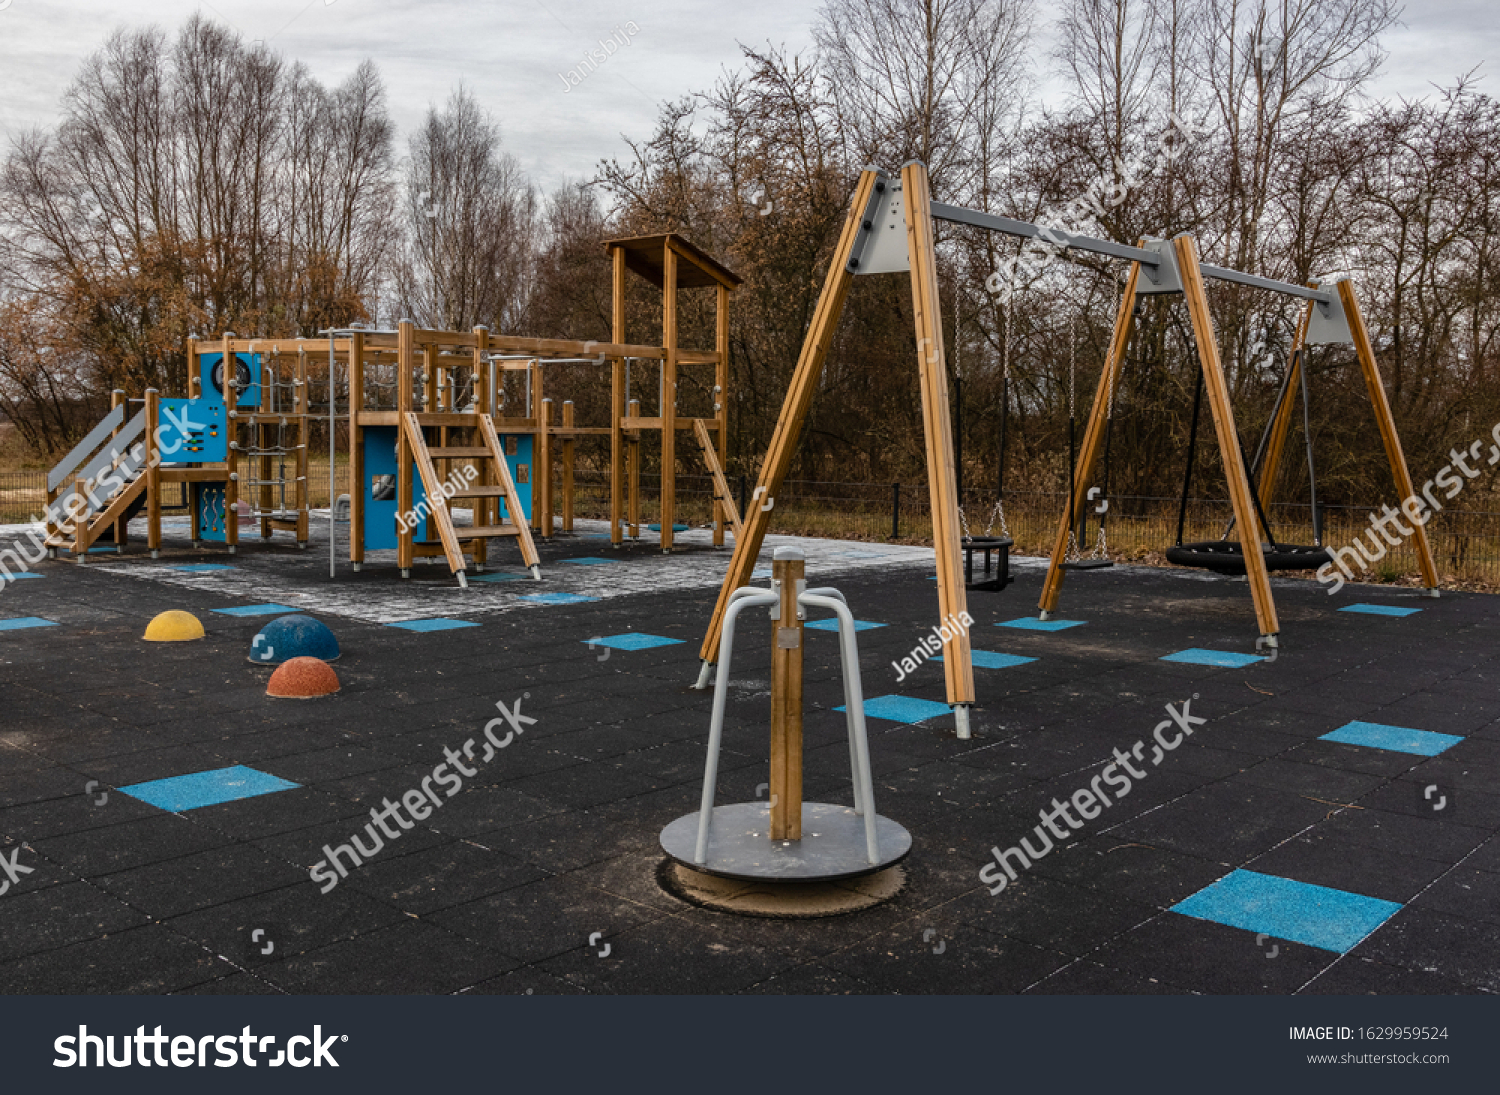 Children's playground with artificial cover, slide and swing. Leisure time, Healthy, active lifestyle #1629959524